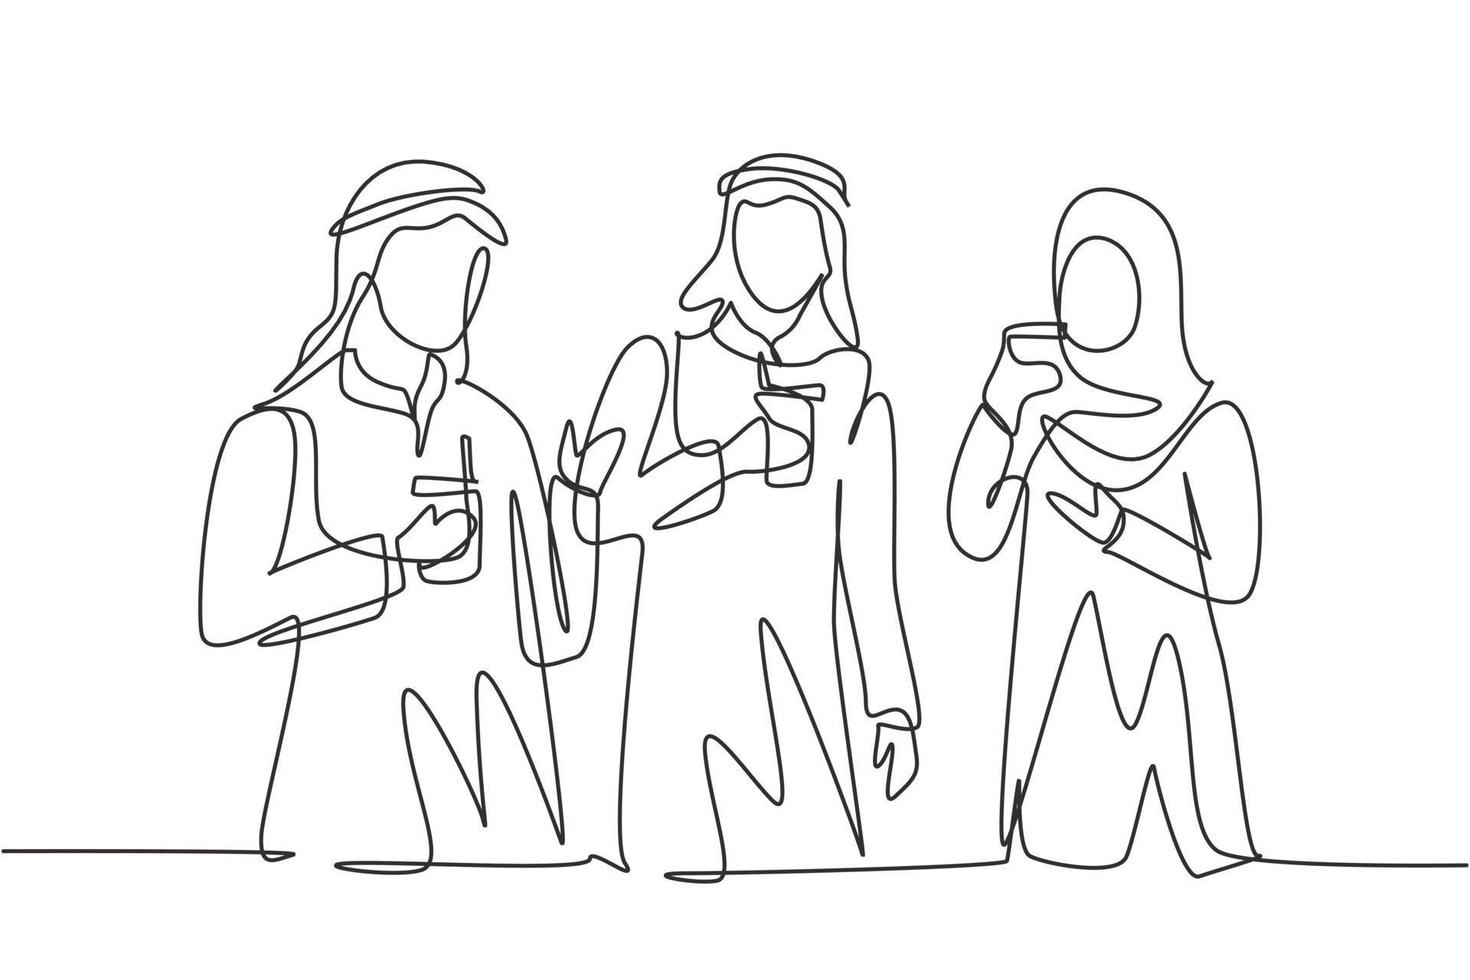 Single one line drawing Arabian teens drink soda to celebrate their friendship by celebrating a party at park. Happy relaxing moment. Modern continuous line draw design graphic vector illustration